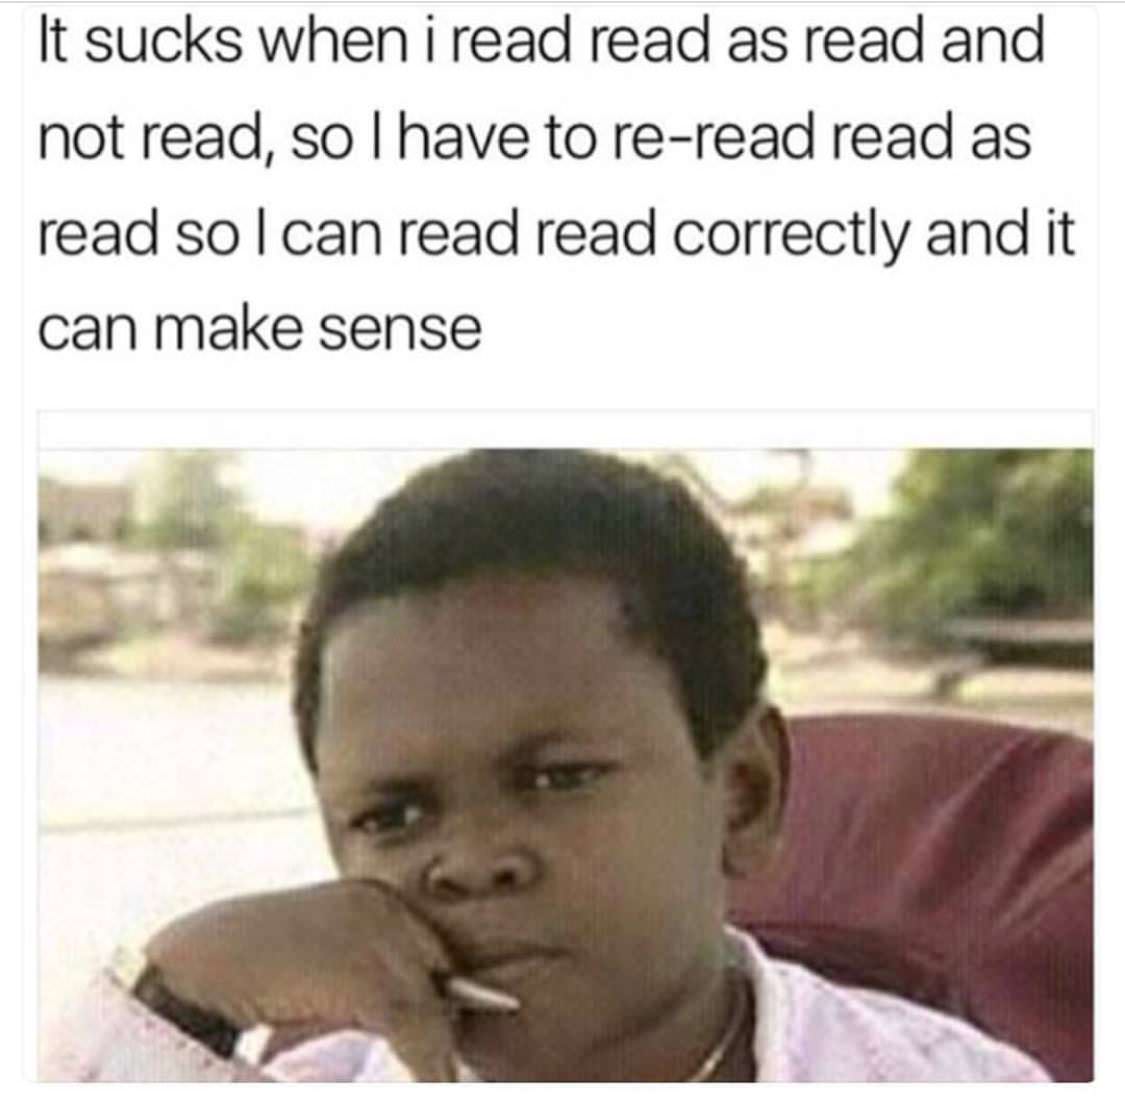 read and read meme - It sucks when i read read as read and not read, so I have to reread read as read solcan read read correctly and it can make sense